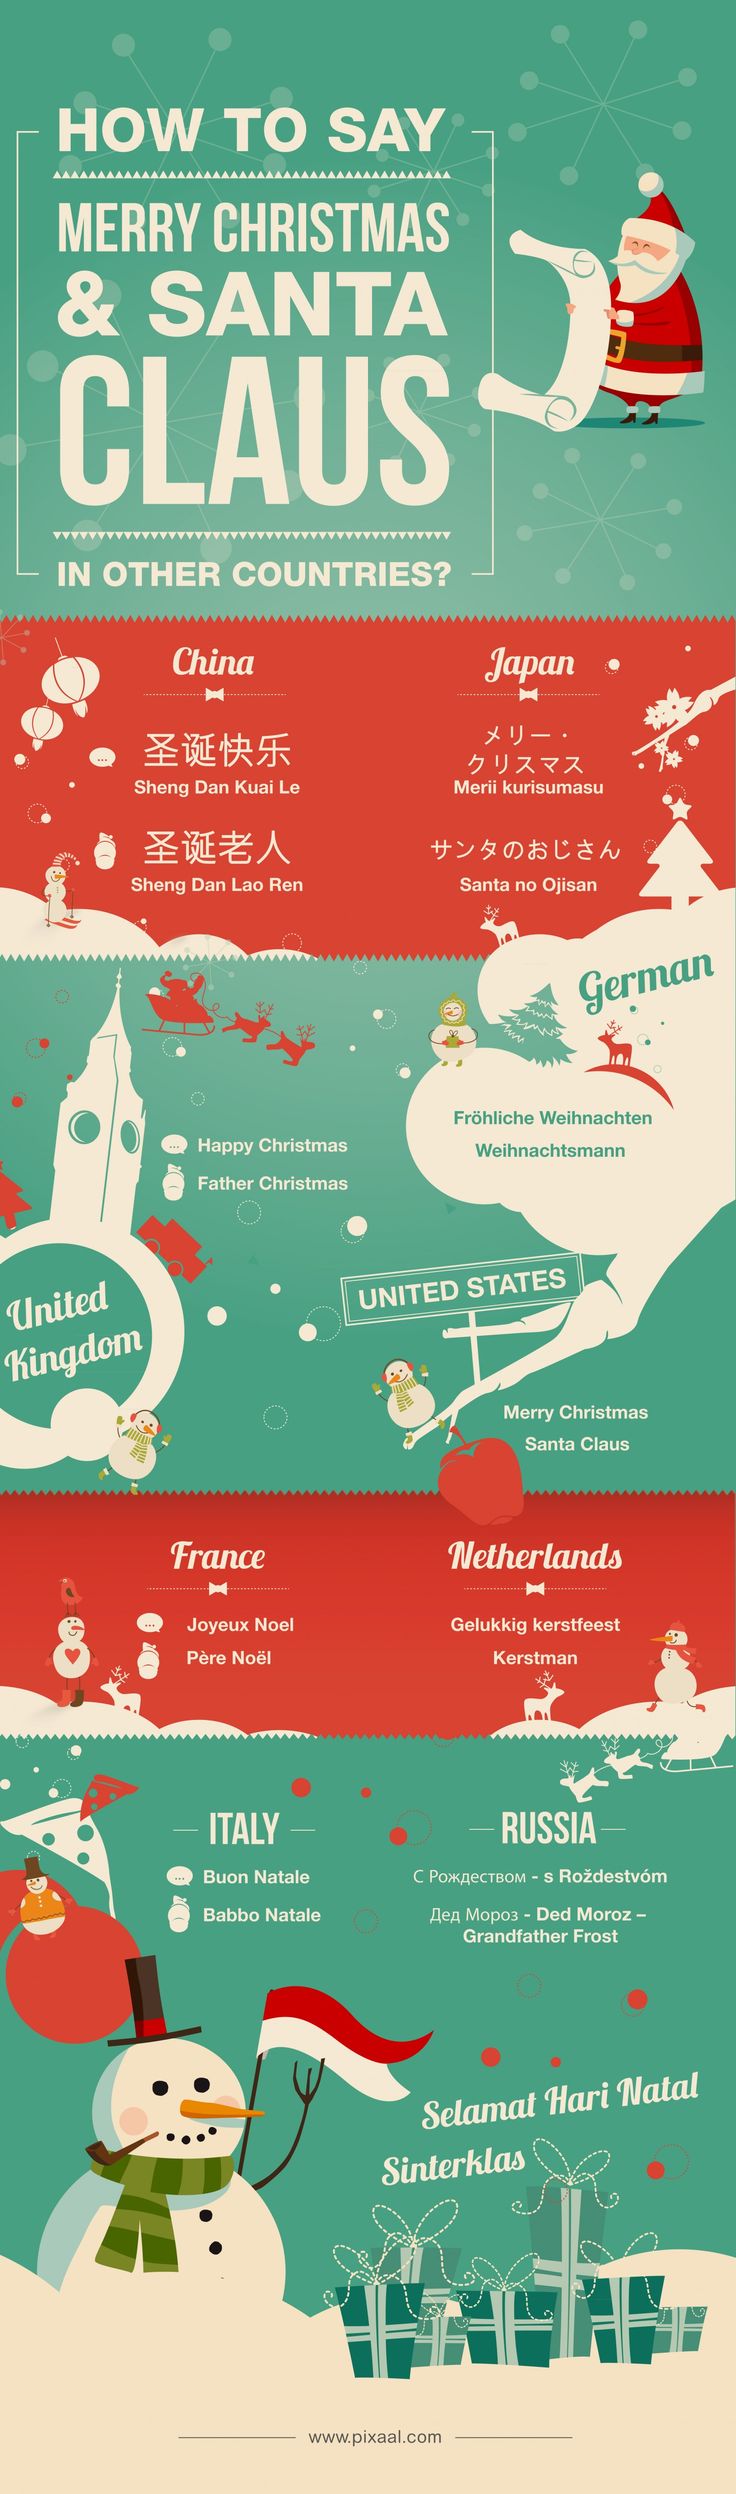 INFOGRAPHIC: Merry Christmas in Other Languages